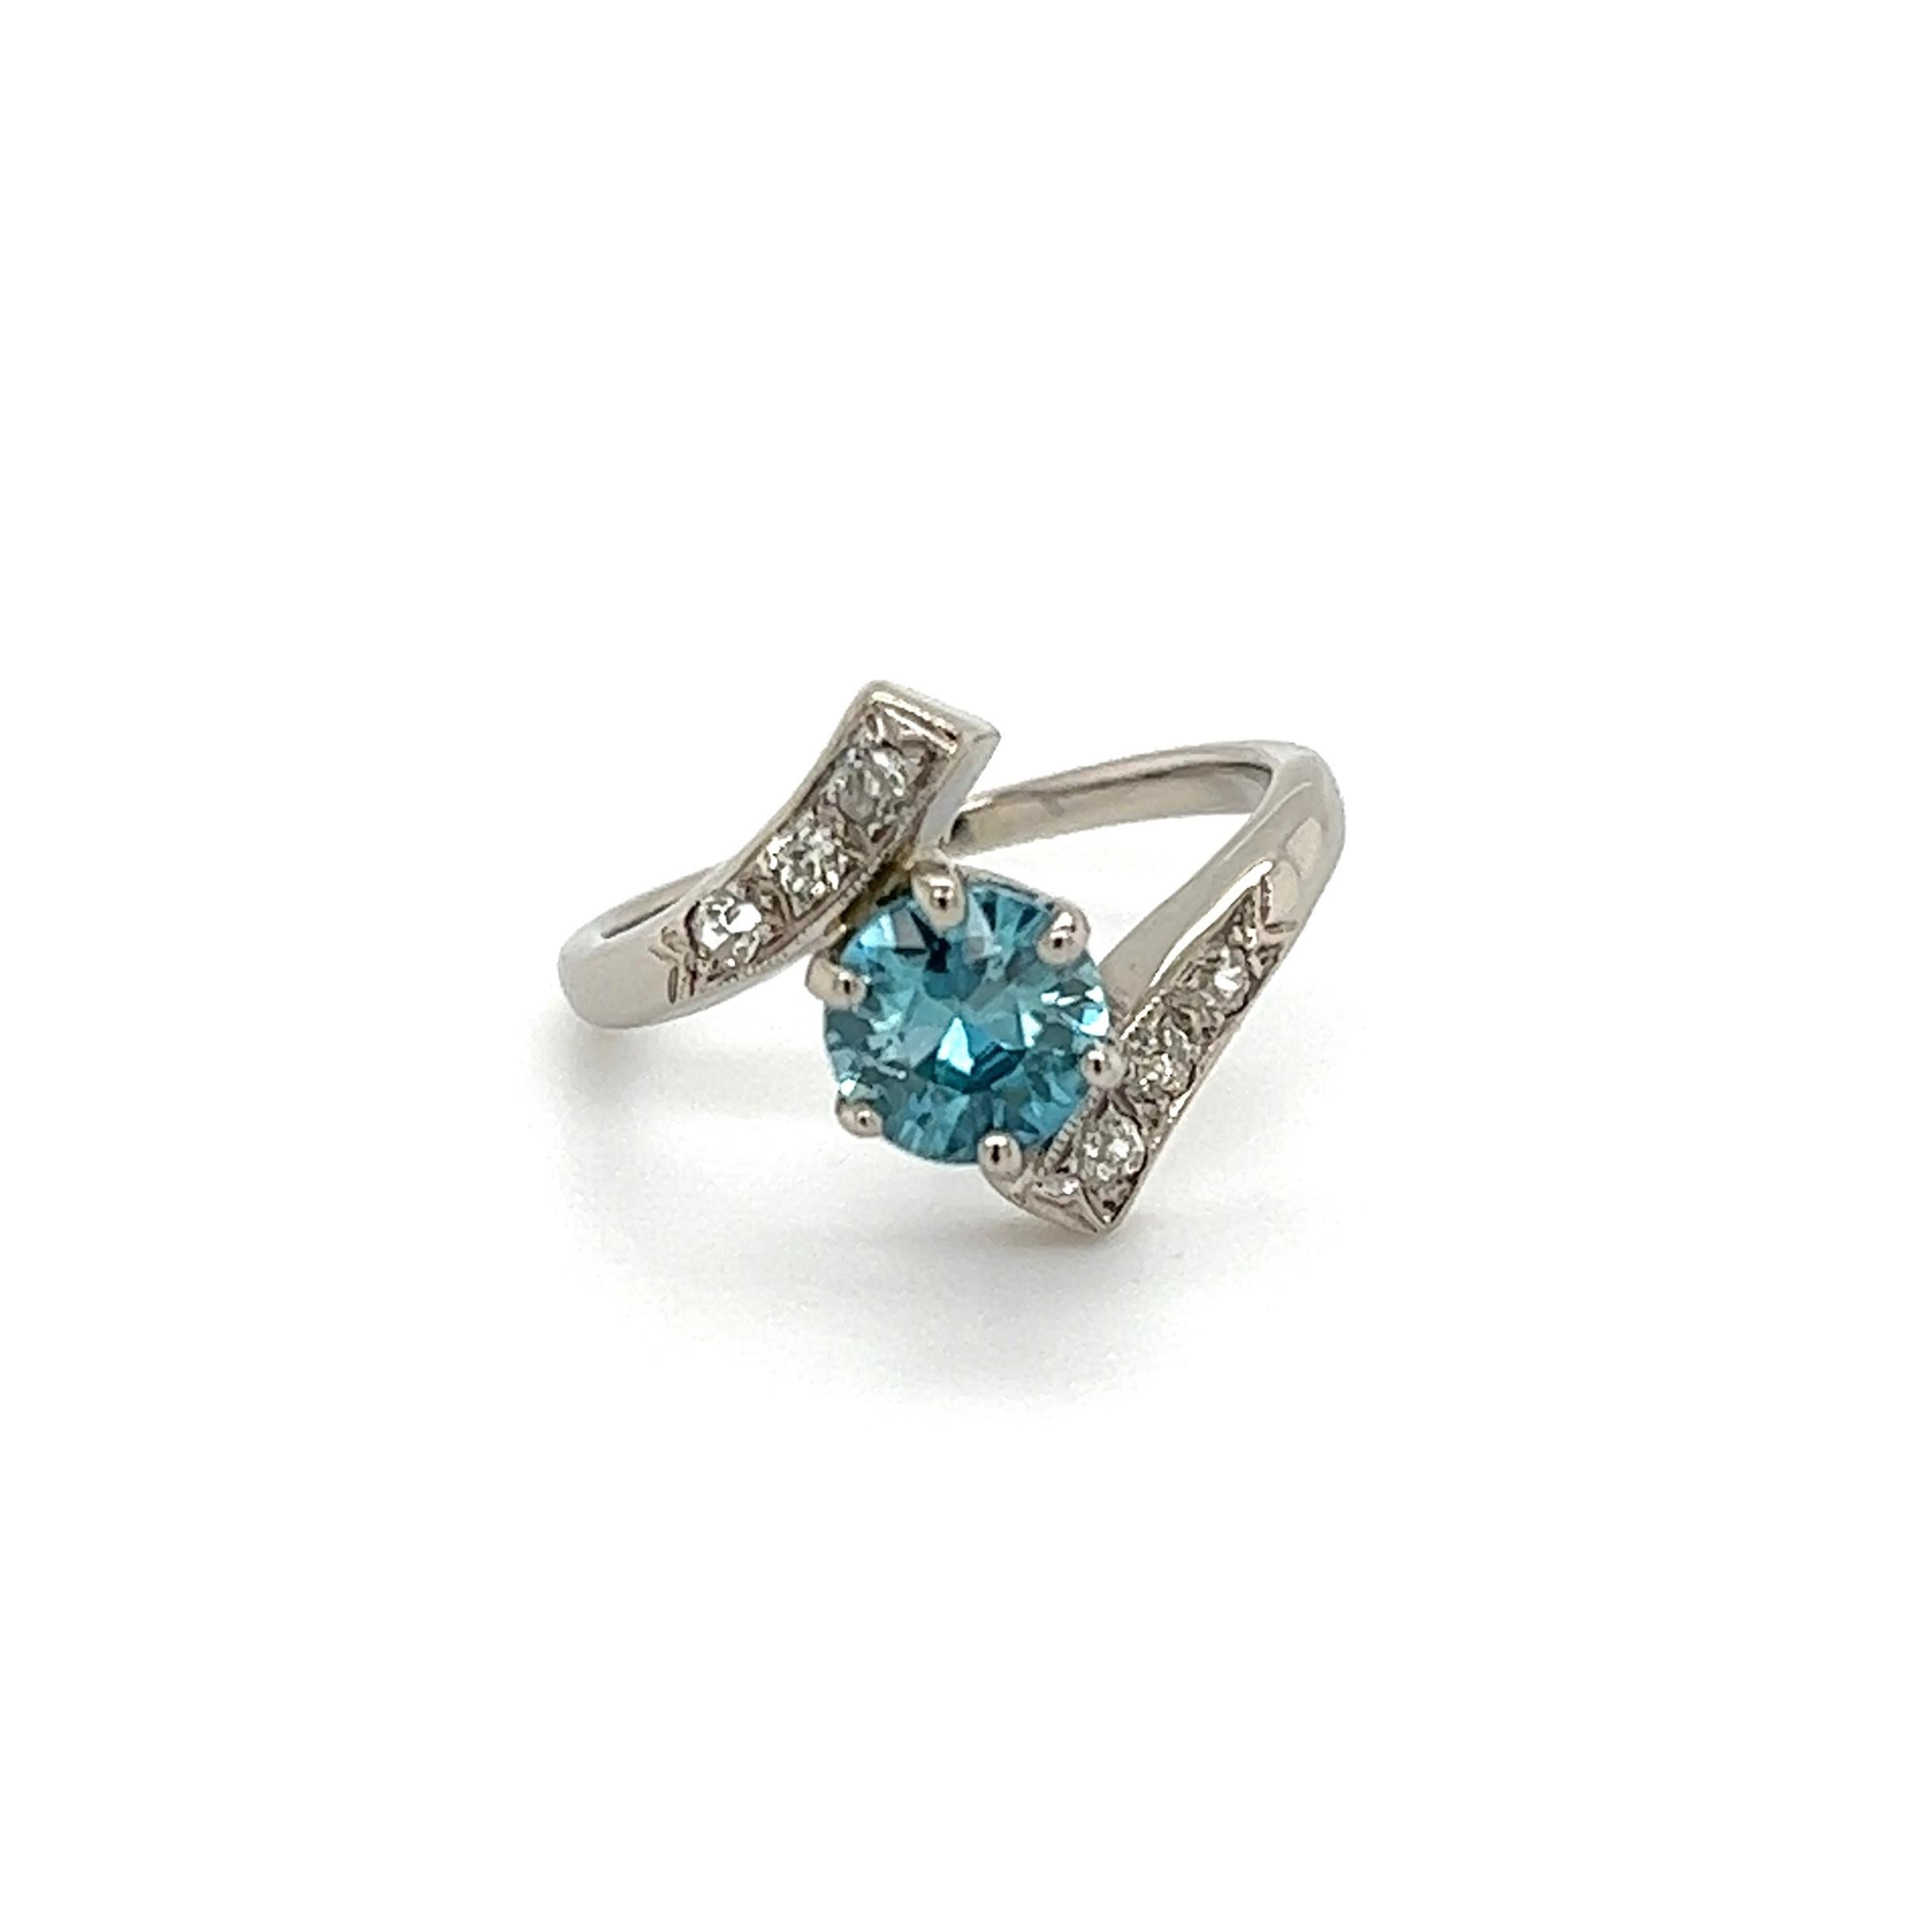 Simply Beautiful! Finely detailed Blue Zircon and Diamond Art Deco Gold Bypass Ring. Centering a Hand set securely nestled 1.13 Carat Round Blue Zircon. Artfully surrounded by Round Diamonds, approx. 0.12tcw. Hand crafted 14K white Gold mounting.